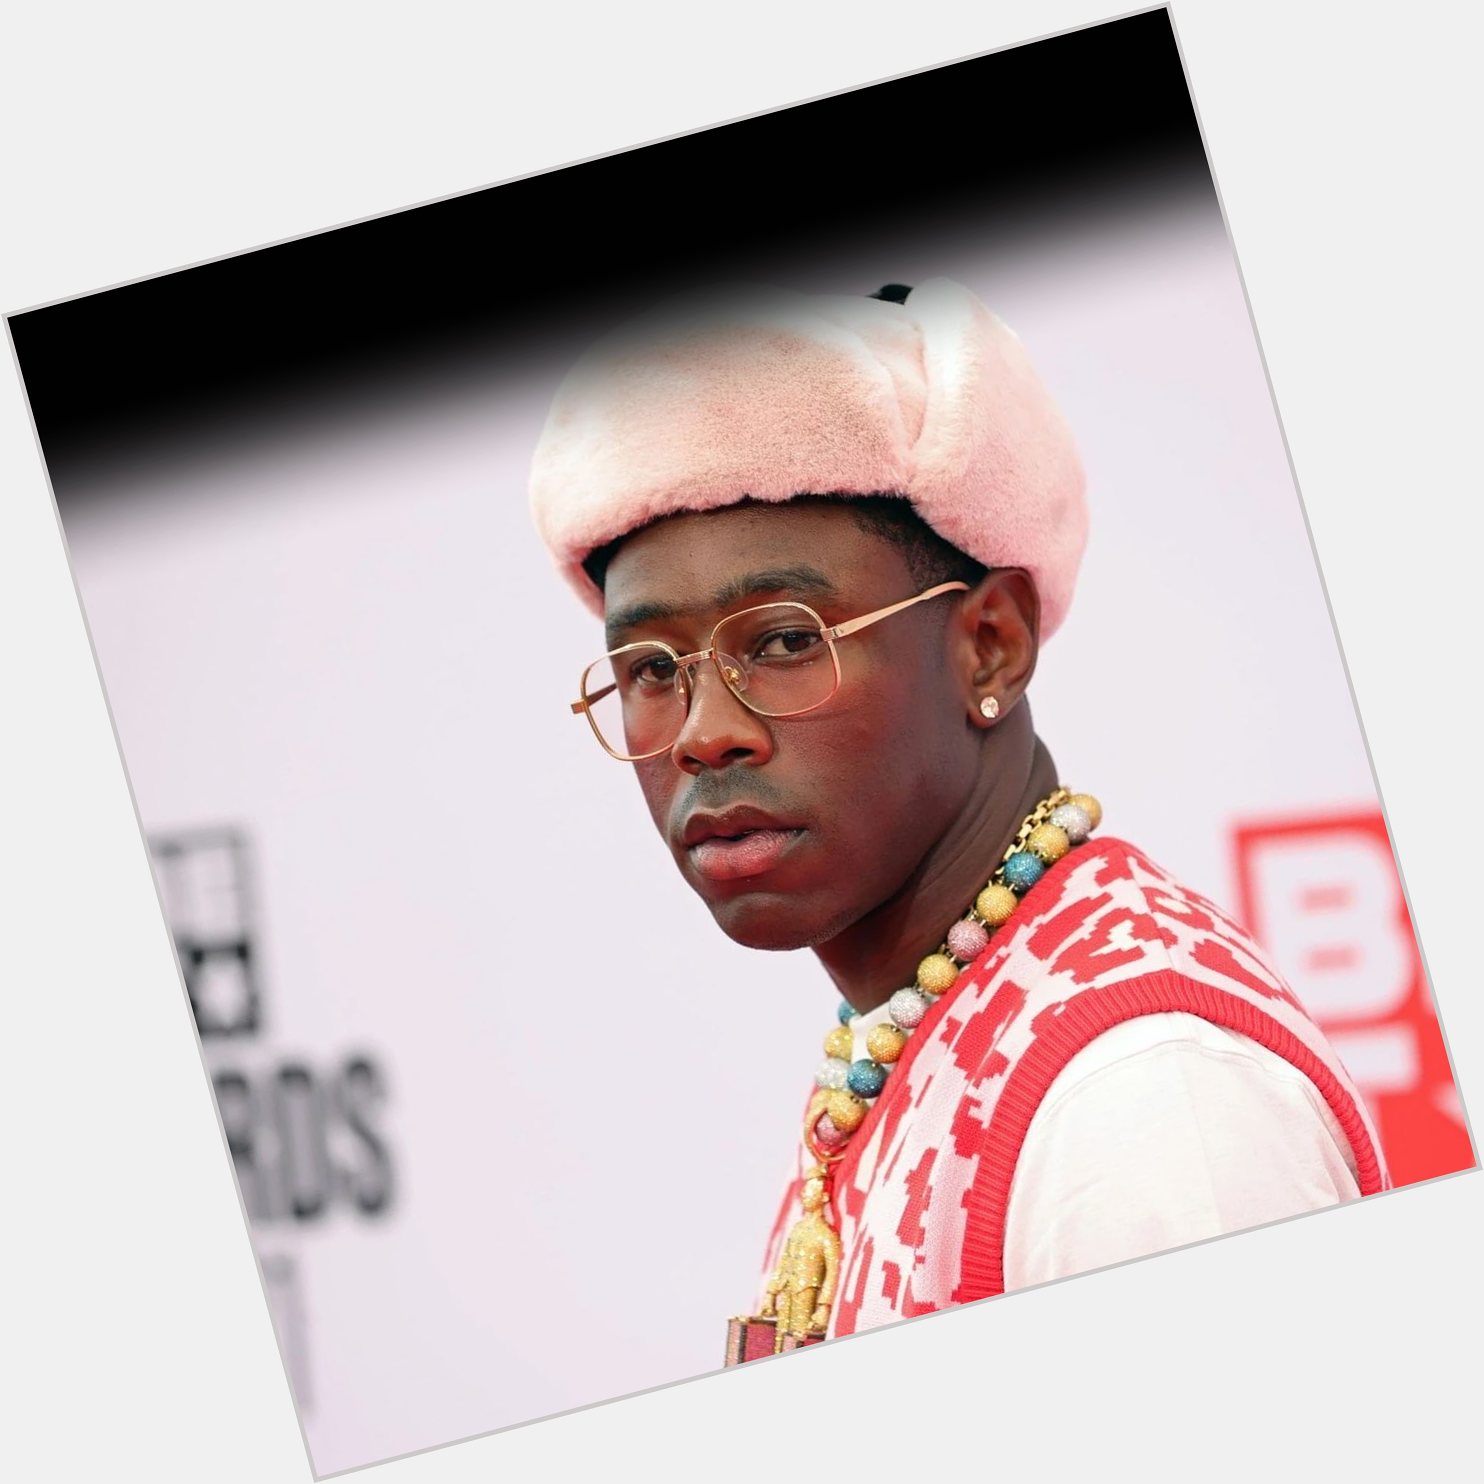 Happy 32nd birthday to one of the most creative and genre-bending artists at the moment, Tyler, The Creator 